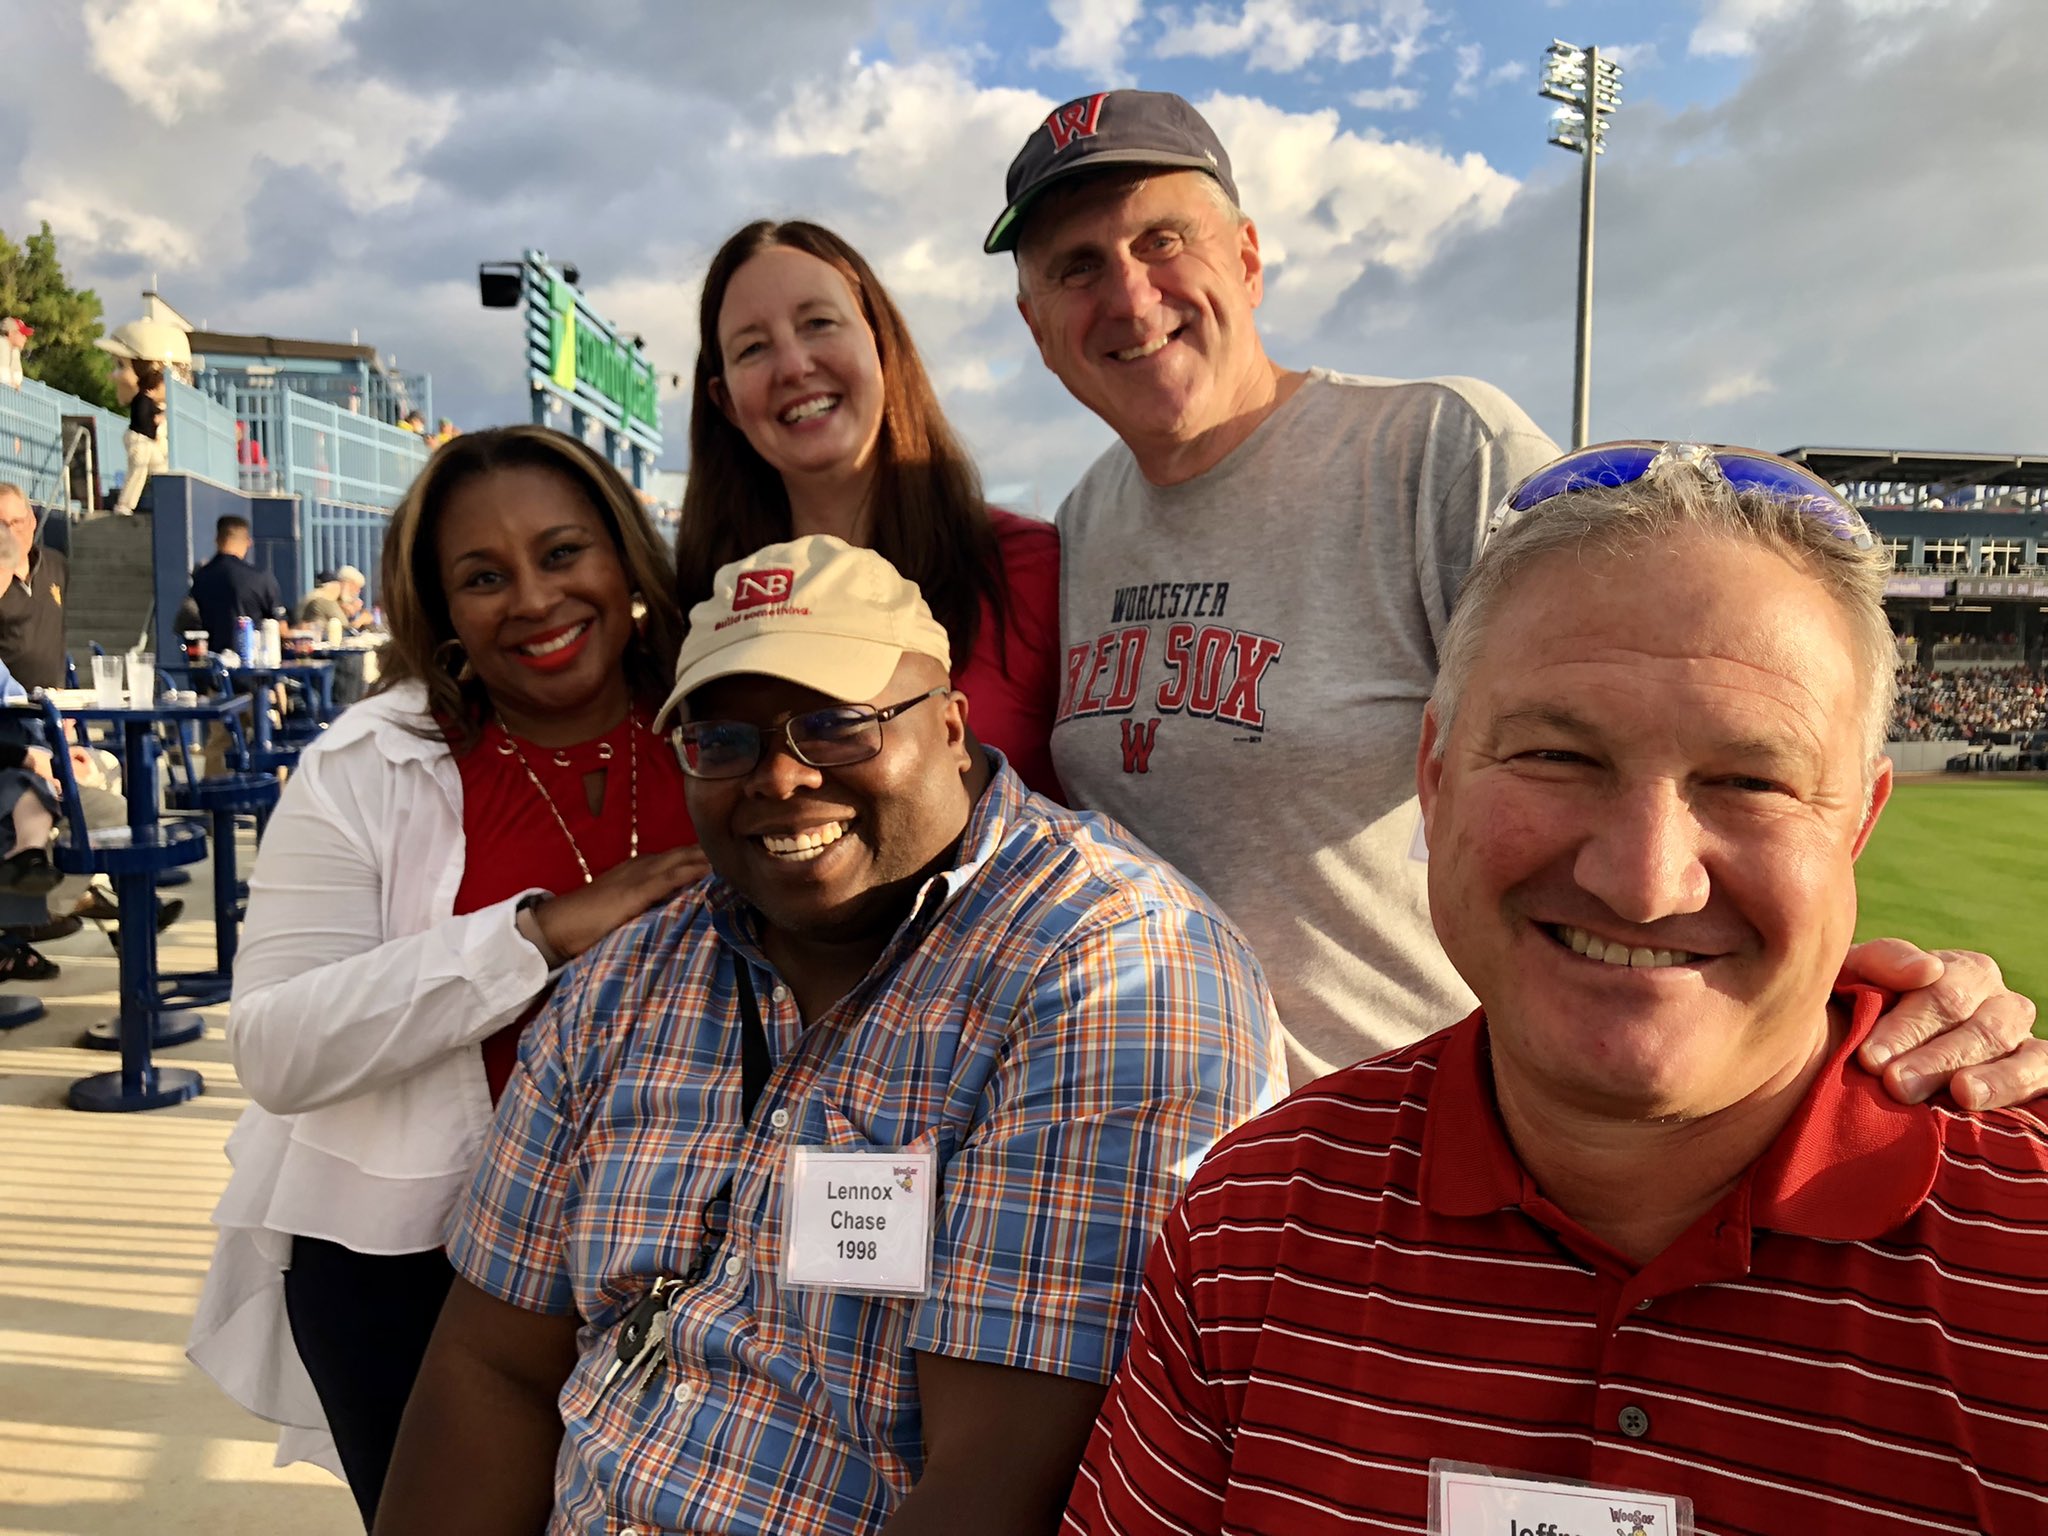 Clockwise from top left: The Honorable Tiffany Williams Brewer ’99, Katie Garrett ’04, Geoffrey Spofford ’89, Jeff Dretler ’91 and Lennox Chase ’98.